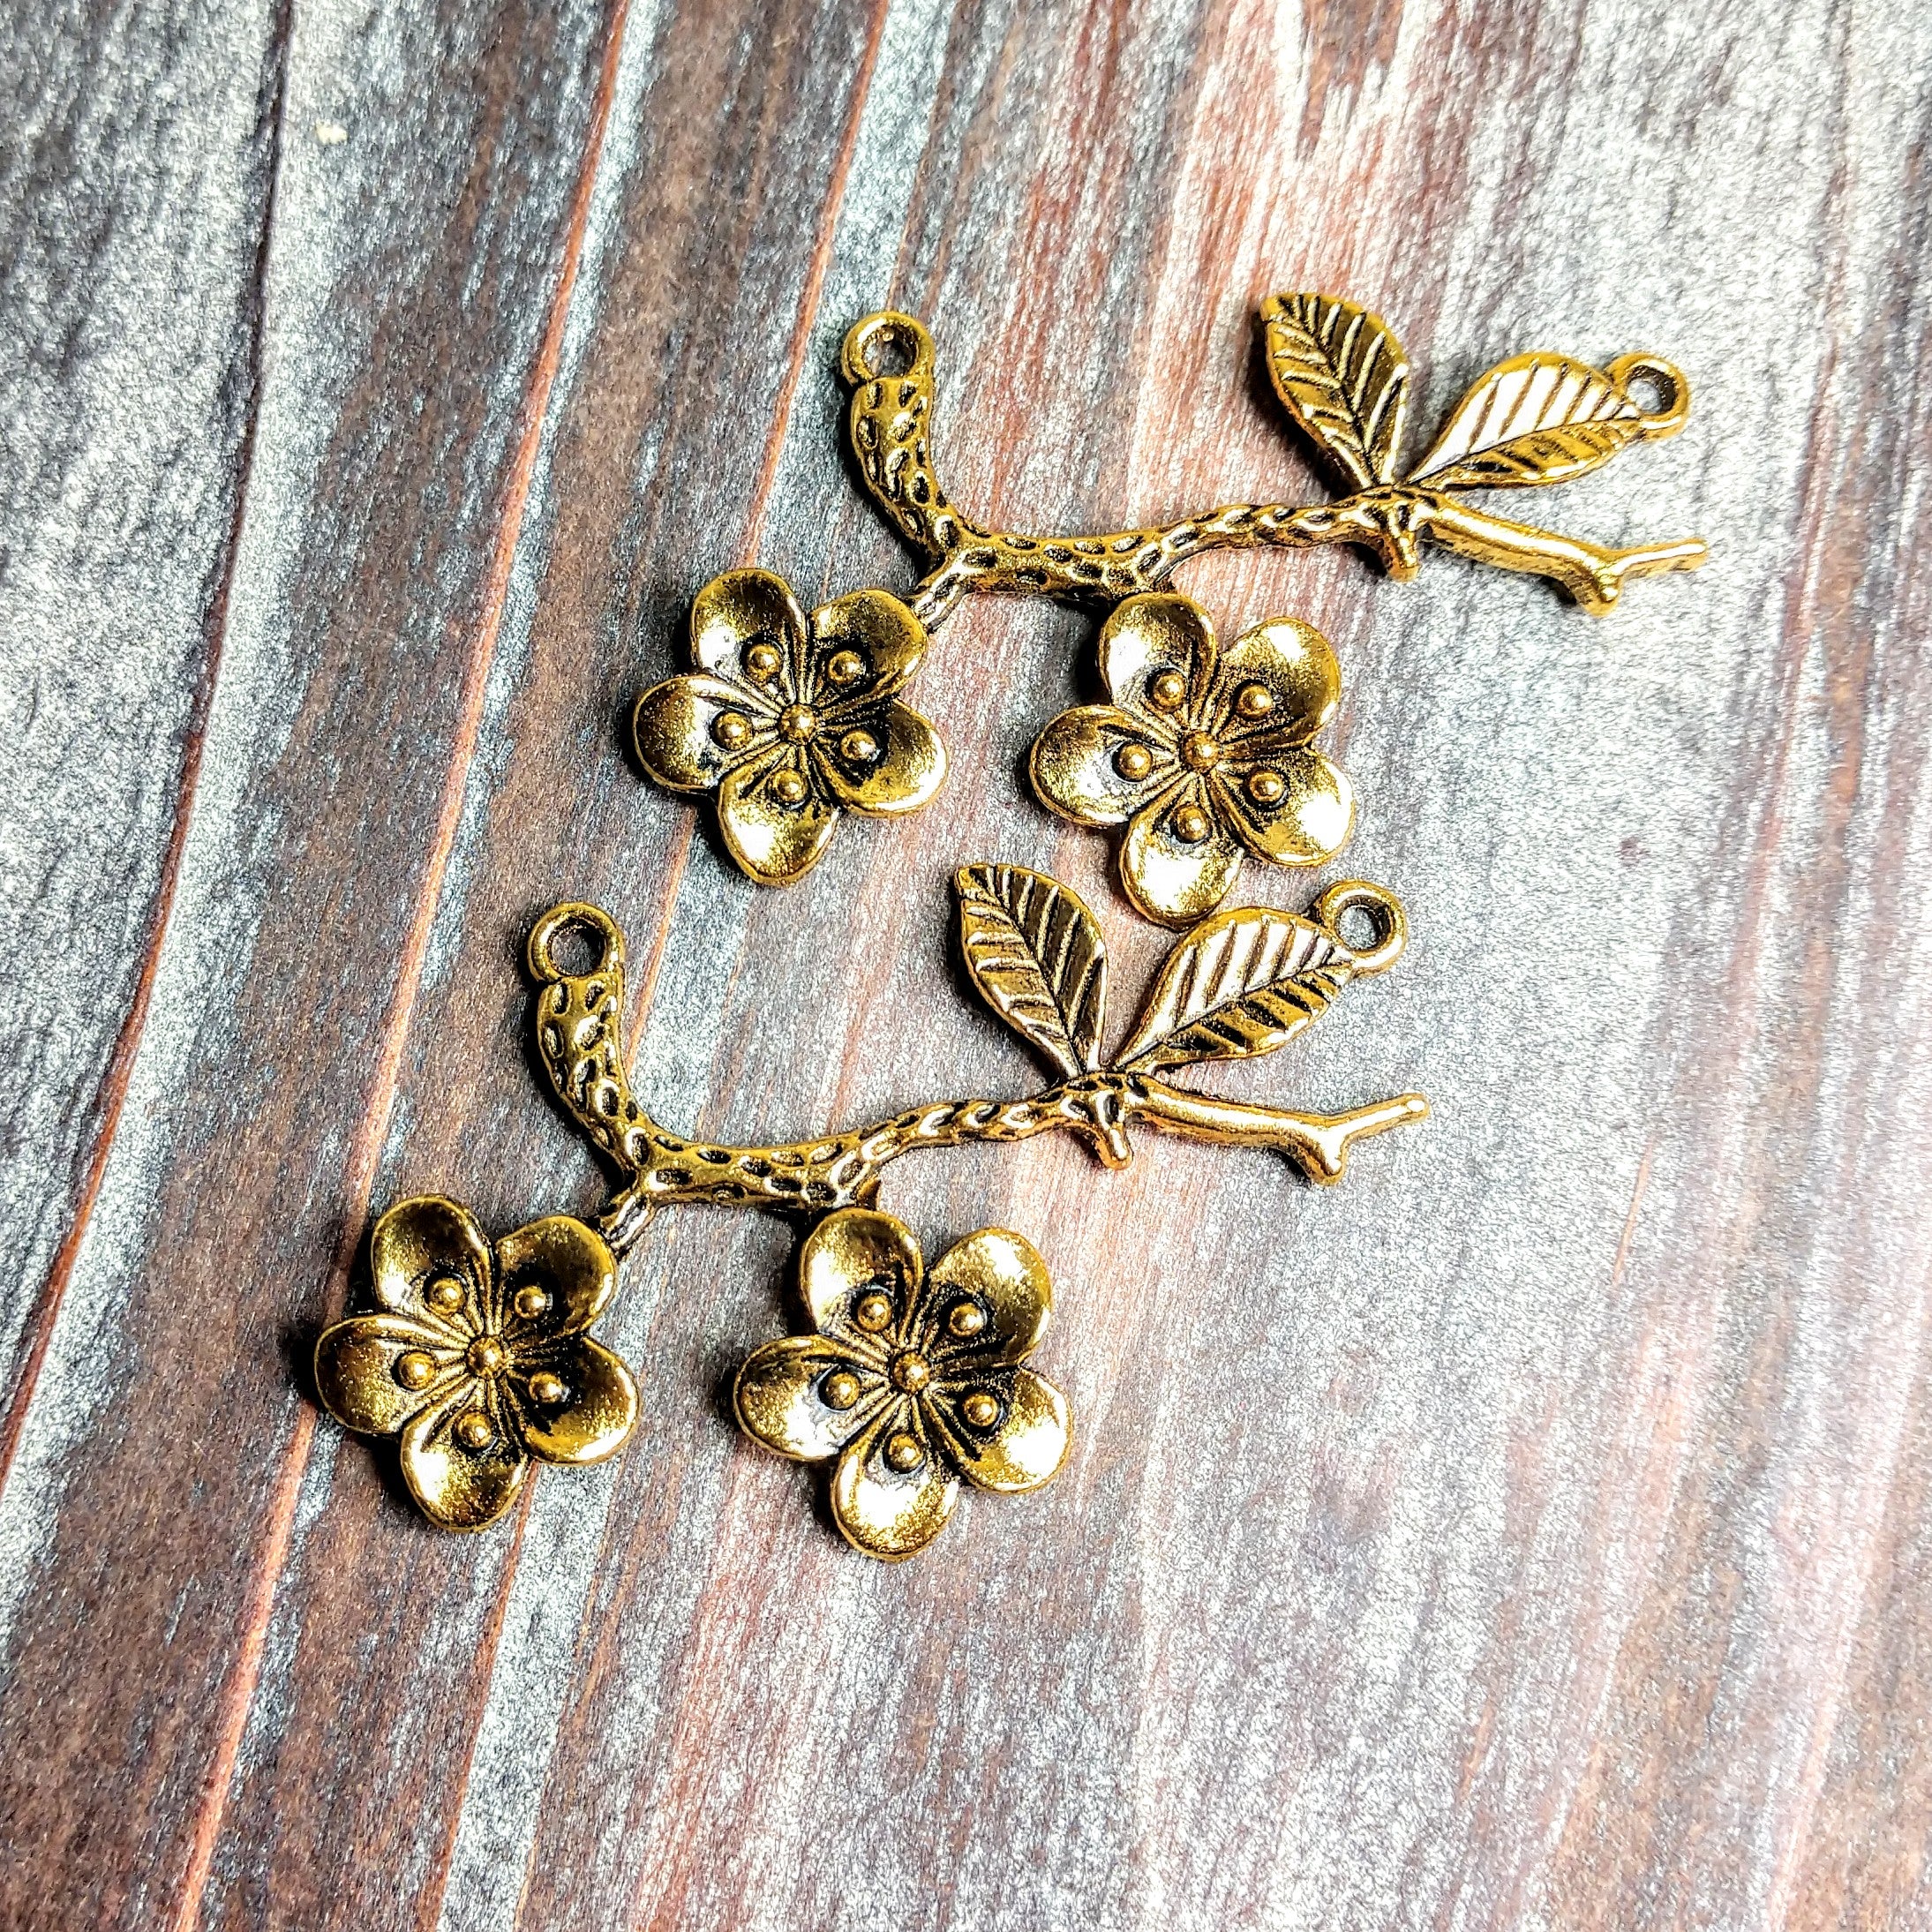 Connector - Flower and Leaves, Antique Gold